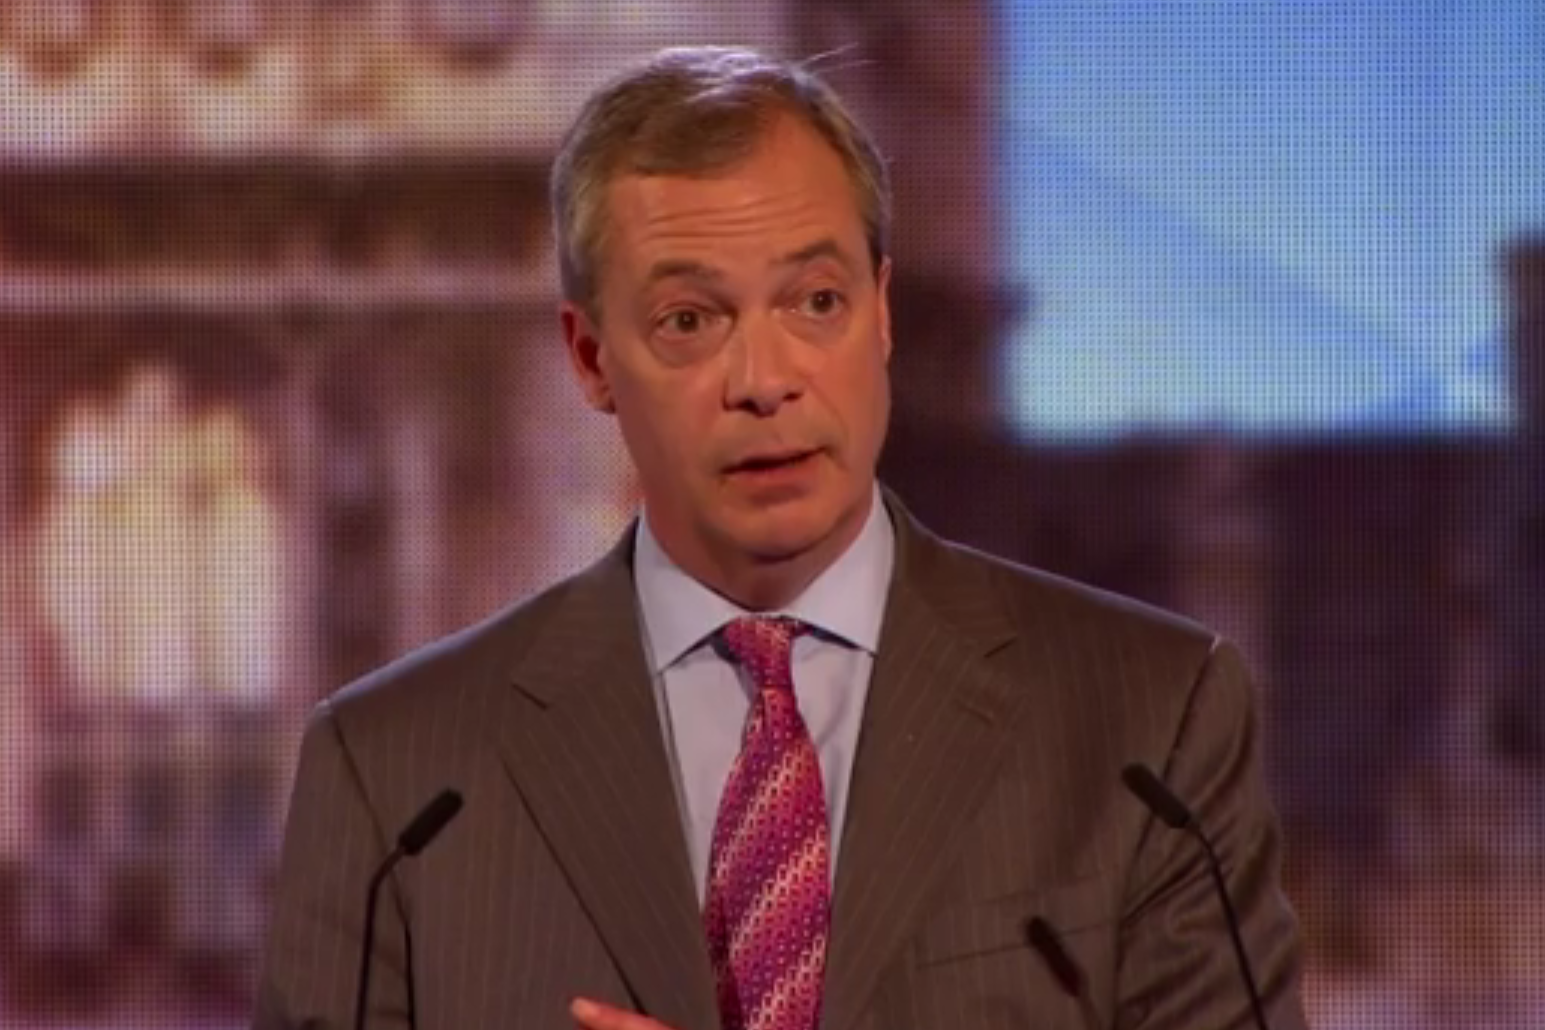 Nigel Farage said he was left with no choice but to work with the Conservatives